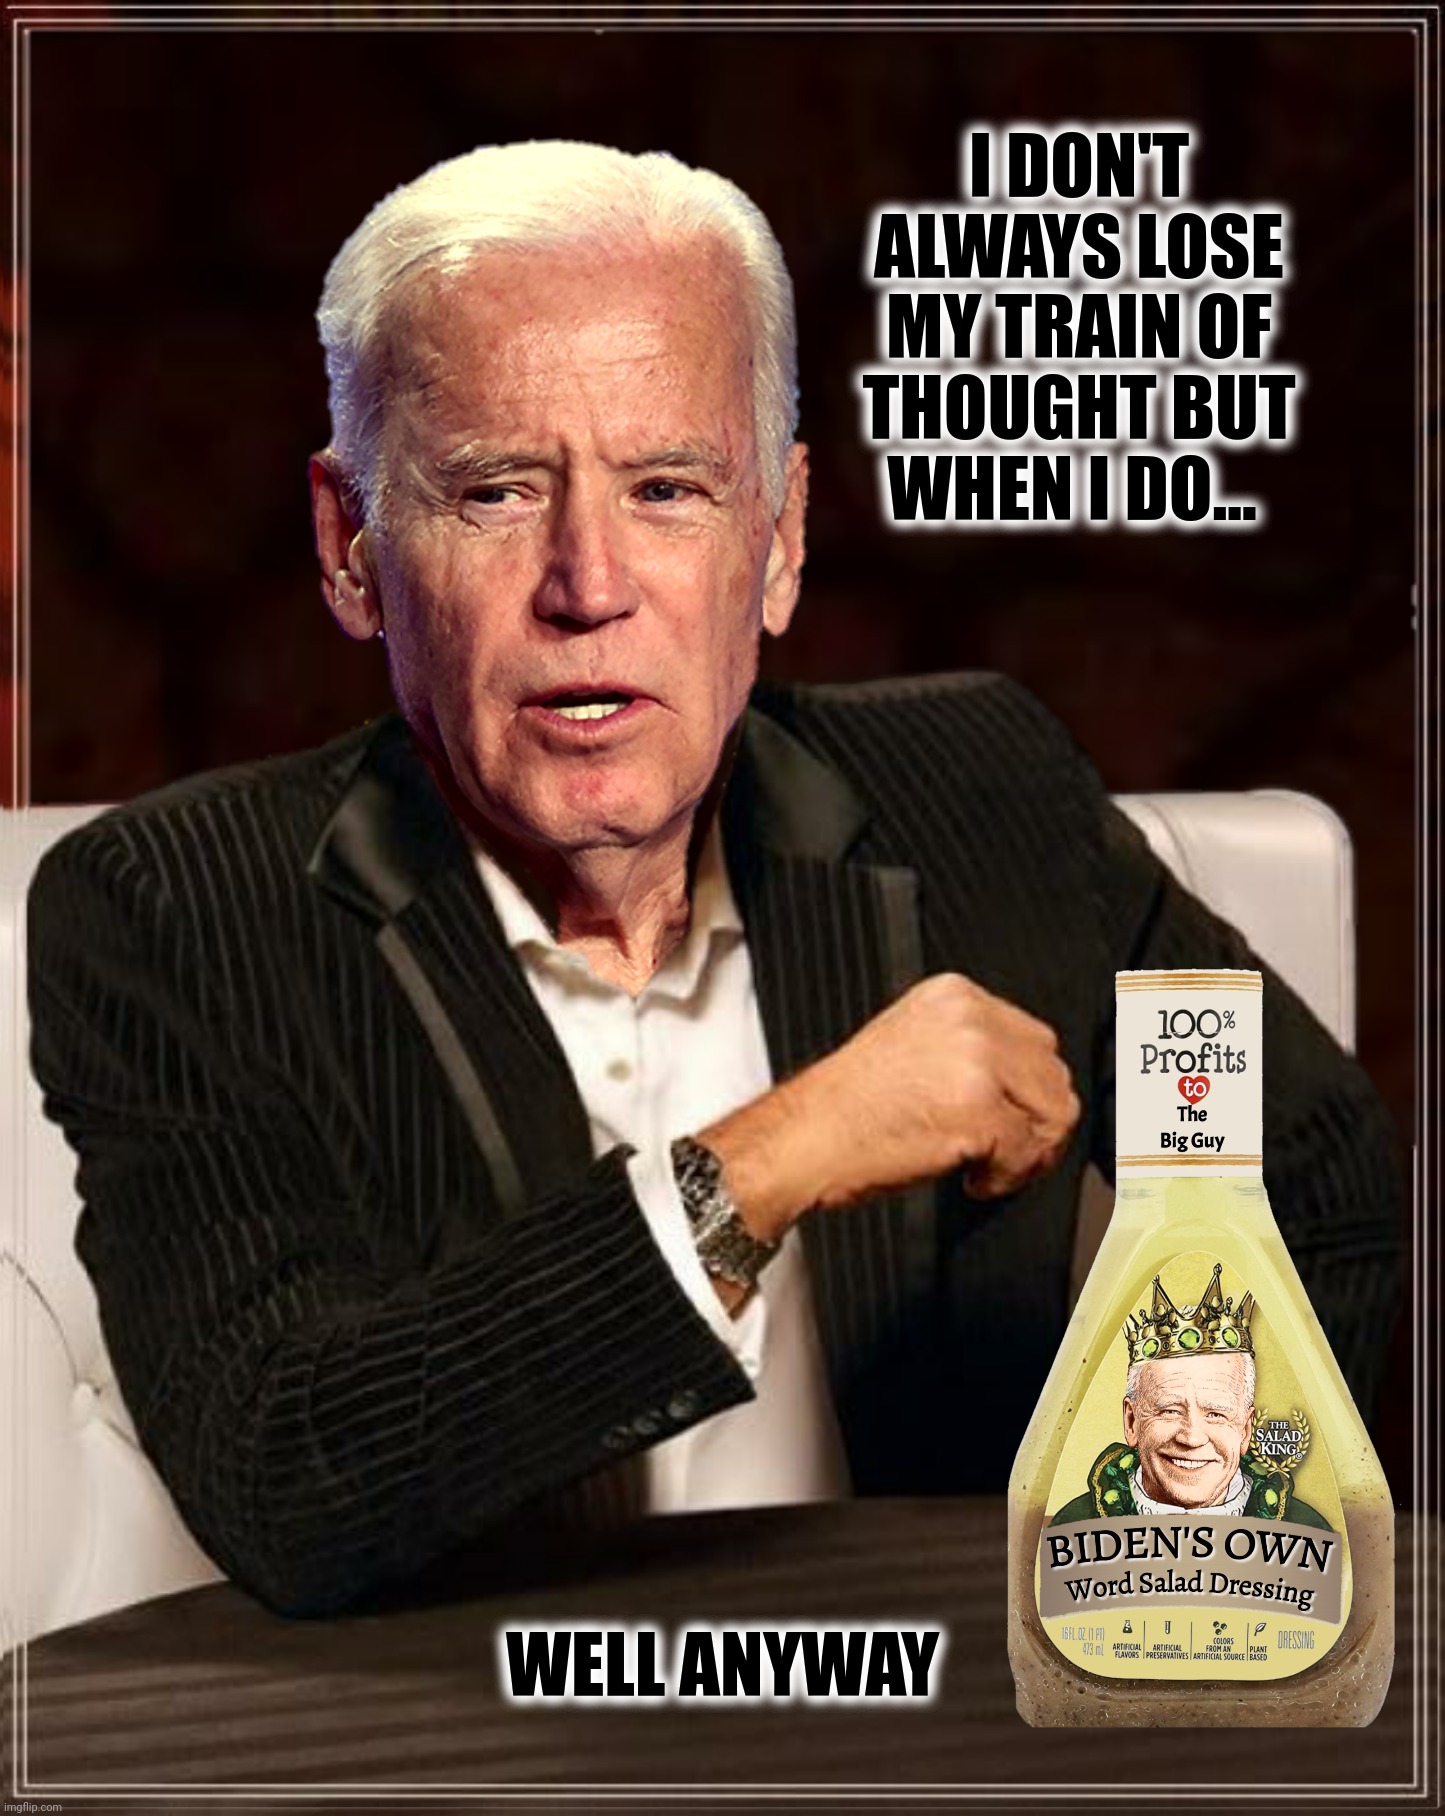 The most uninteresting man in the world | I DON'T ALWAYS LOSE MY TRAIN OF THOUGHT BUT WHEN I DO... WELL ANYWAY | image tagged in bad photoshop,joe biden,the most interesting man in the world | made w/ Imgflip meme maker